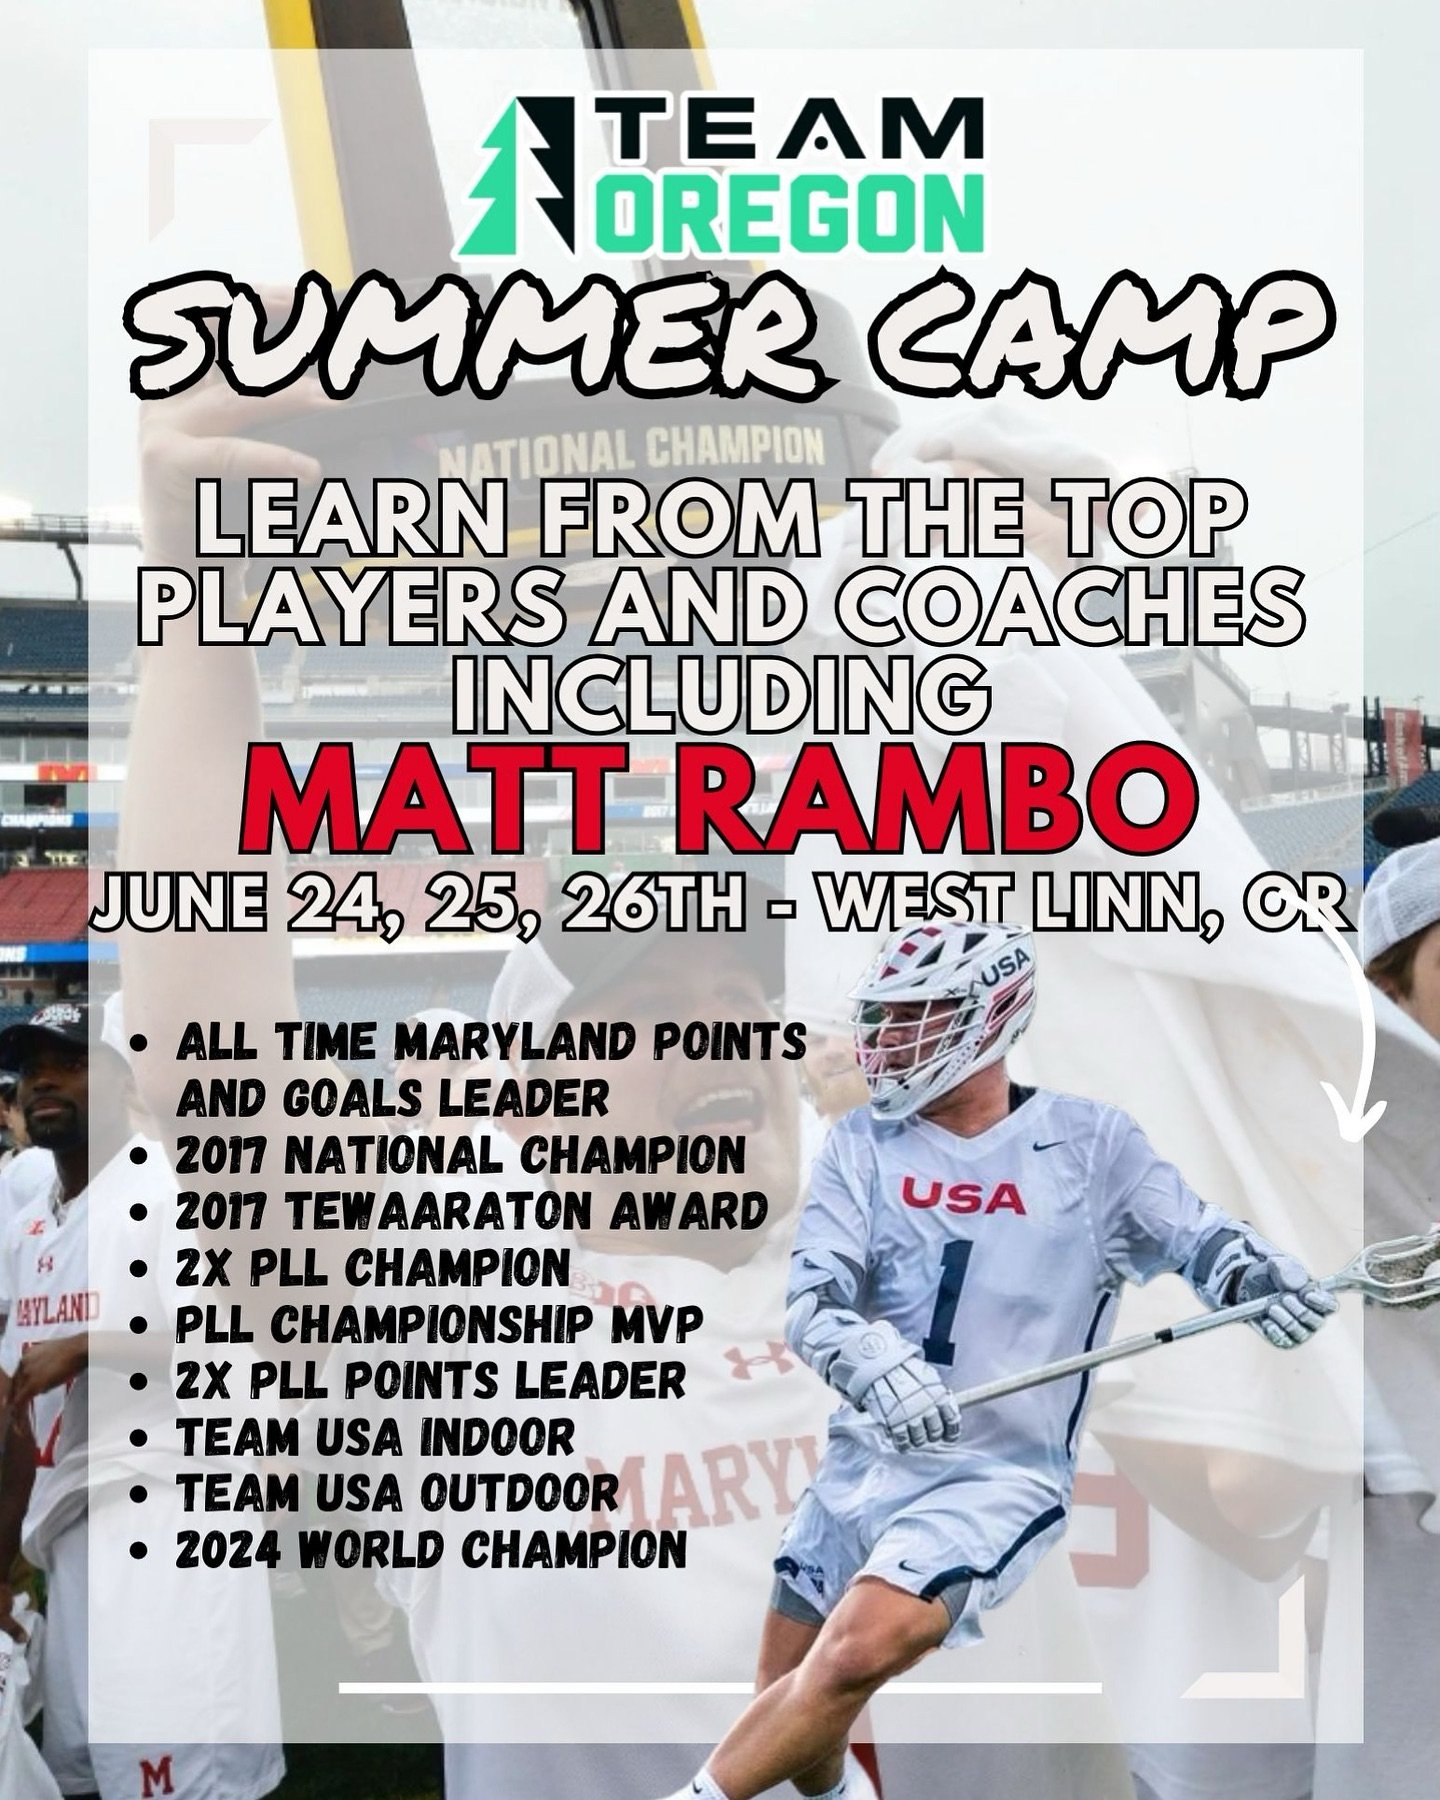 Matt Rambo will be joining us at our Youth Summer Camp! One of the best players in the history of the sport will be passing along his knowledge, sign up today for a fun 3 days of competition, prizes, and skill sessions! 

#teamoregonlacrosse